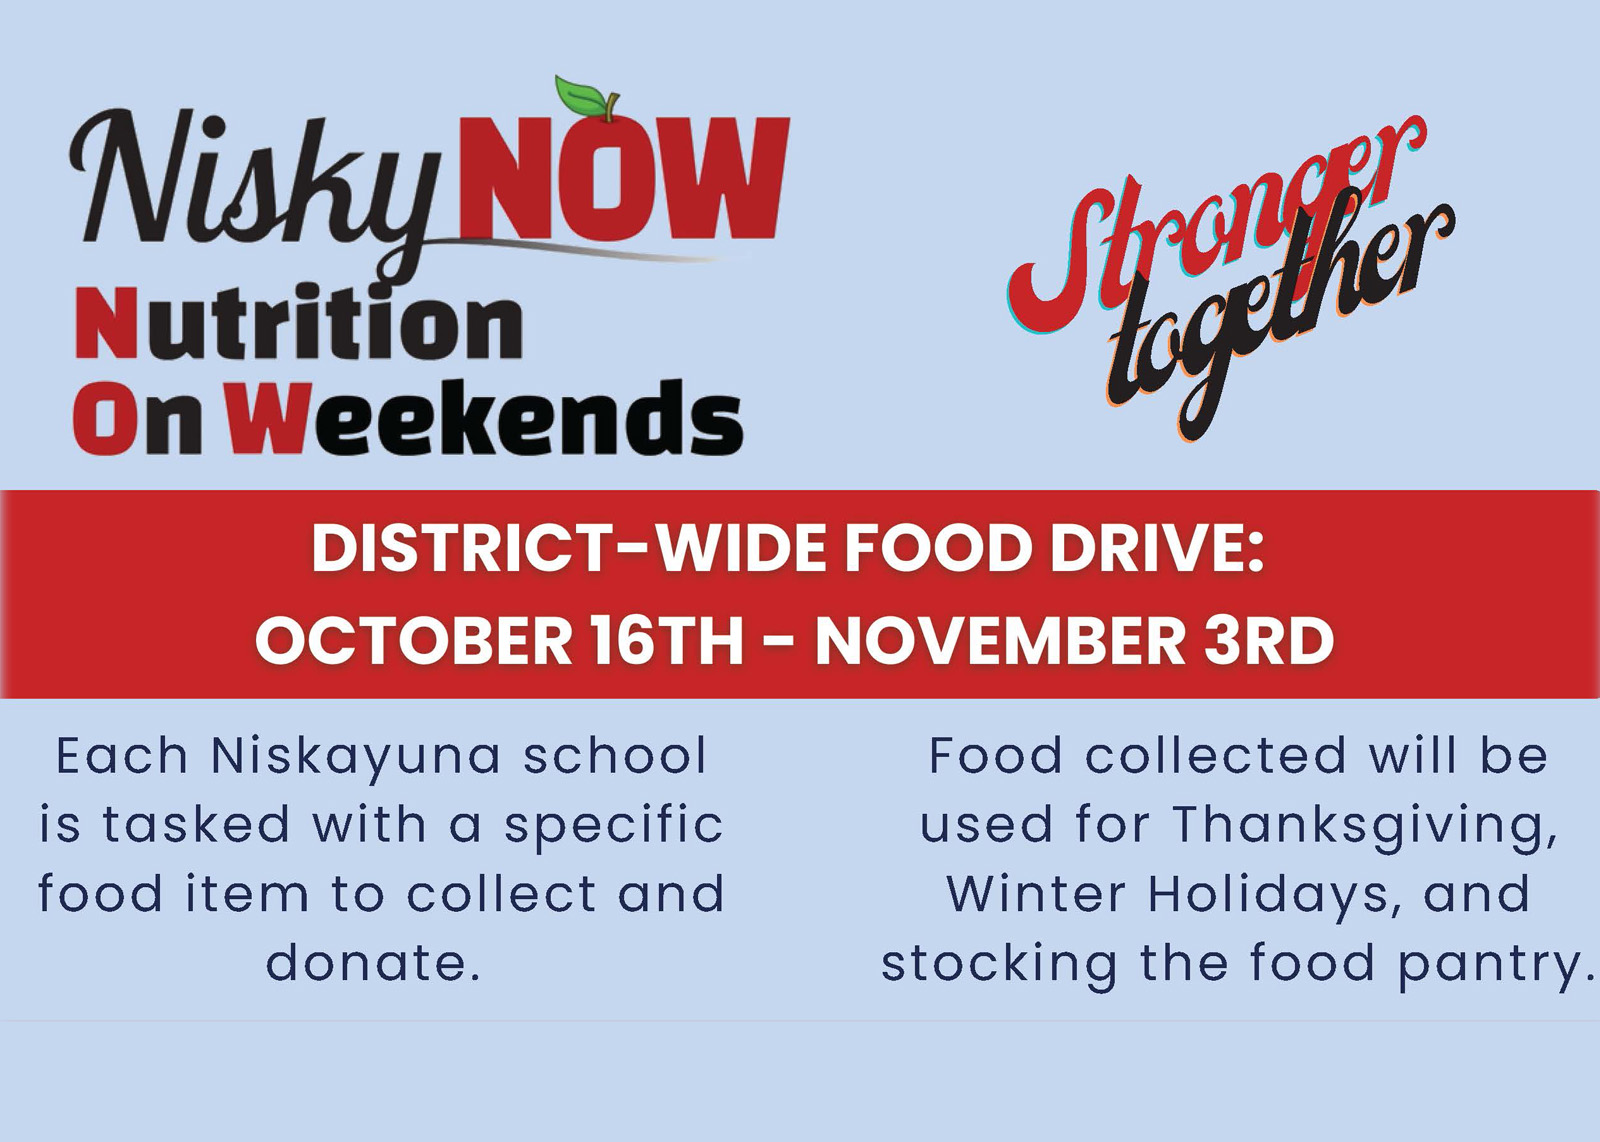 Nutrition on Weekends food drive announcement